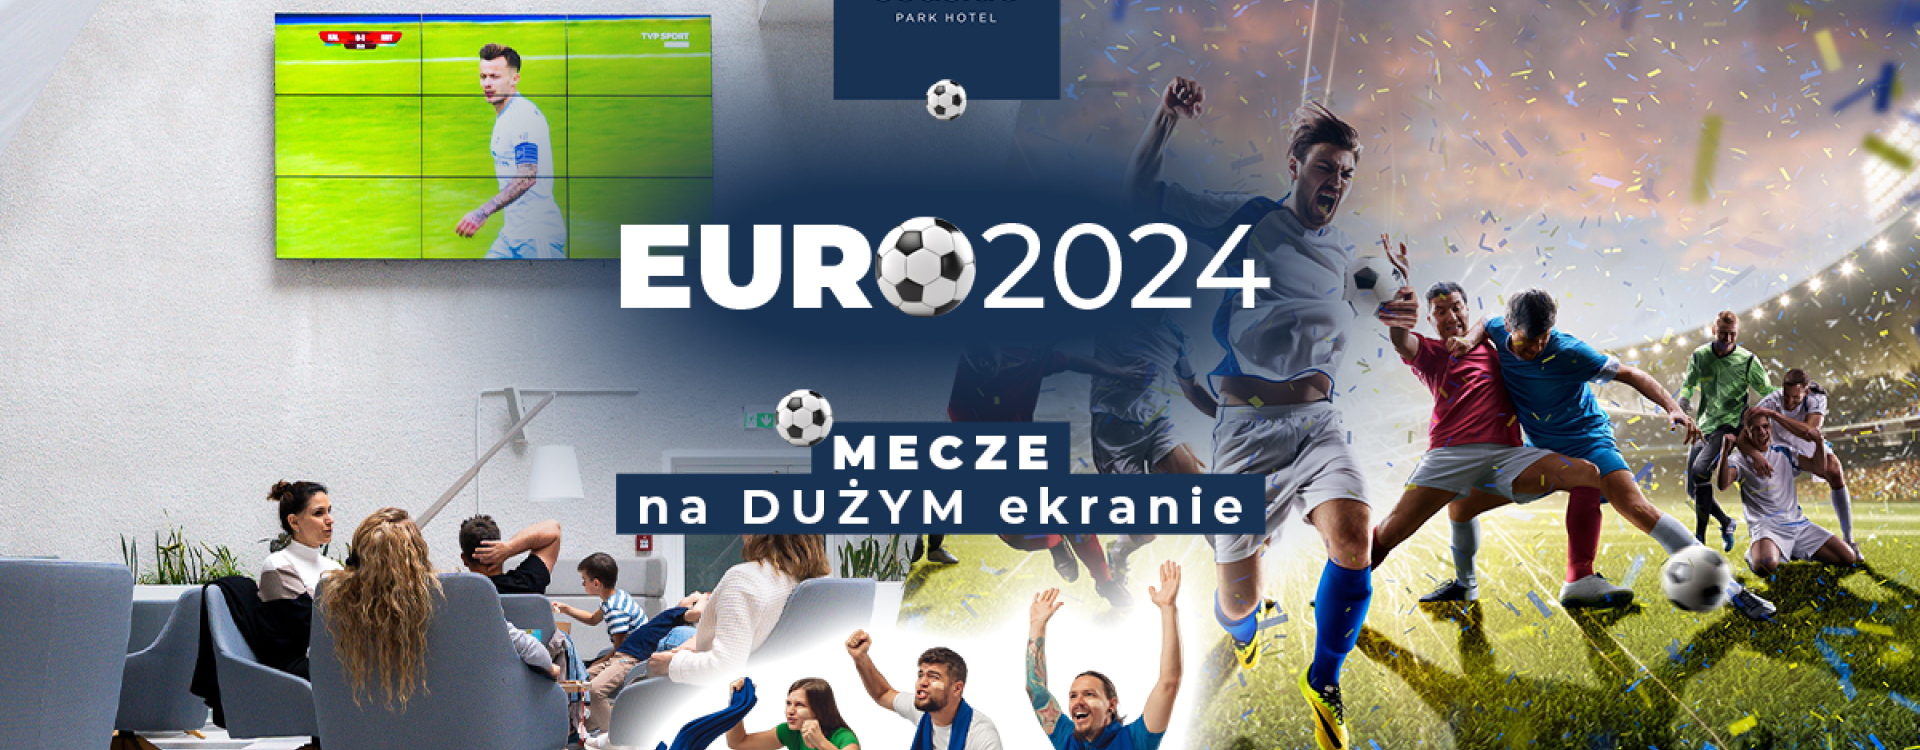 EURO 2024 matches on the big screen